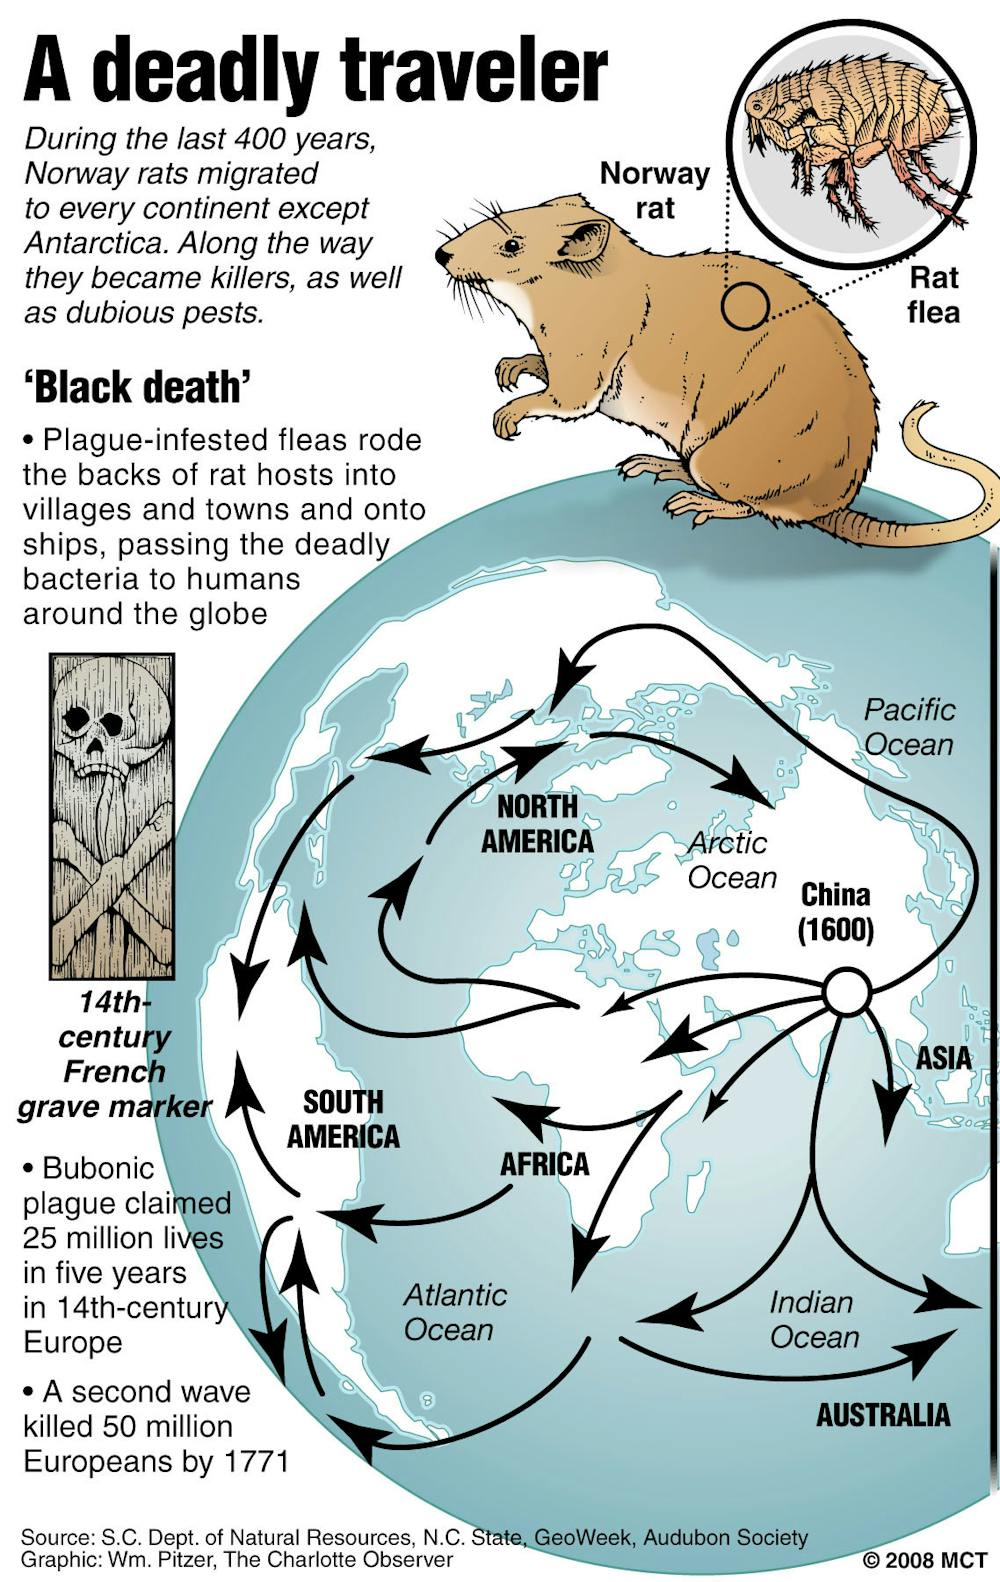 the black death rats and fleas